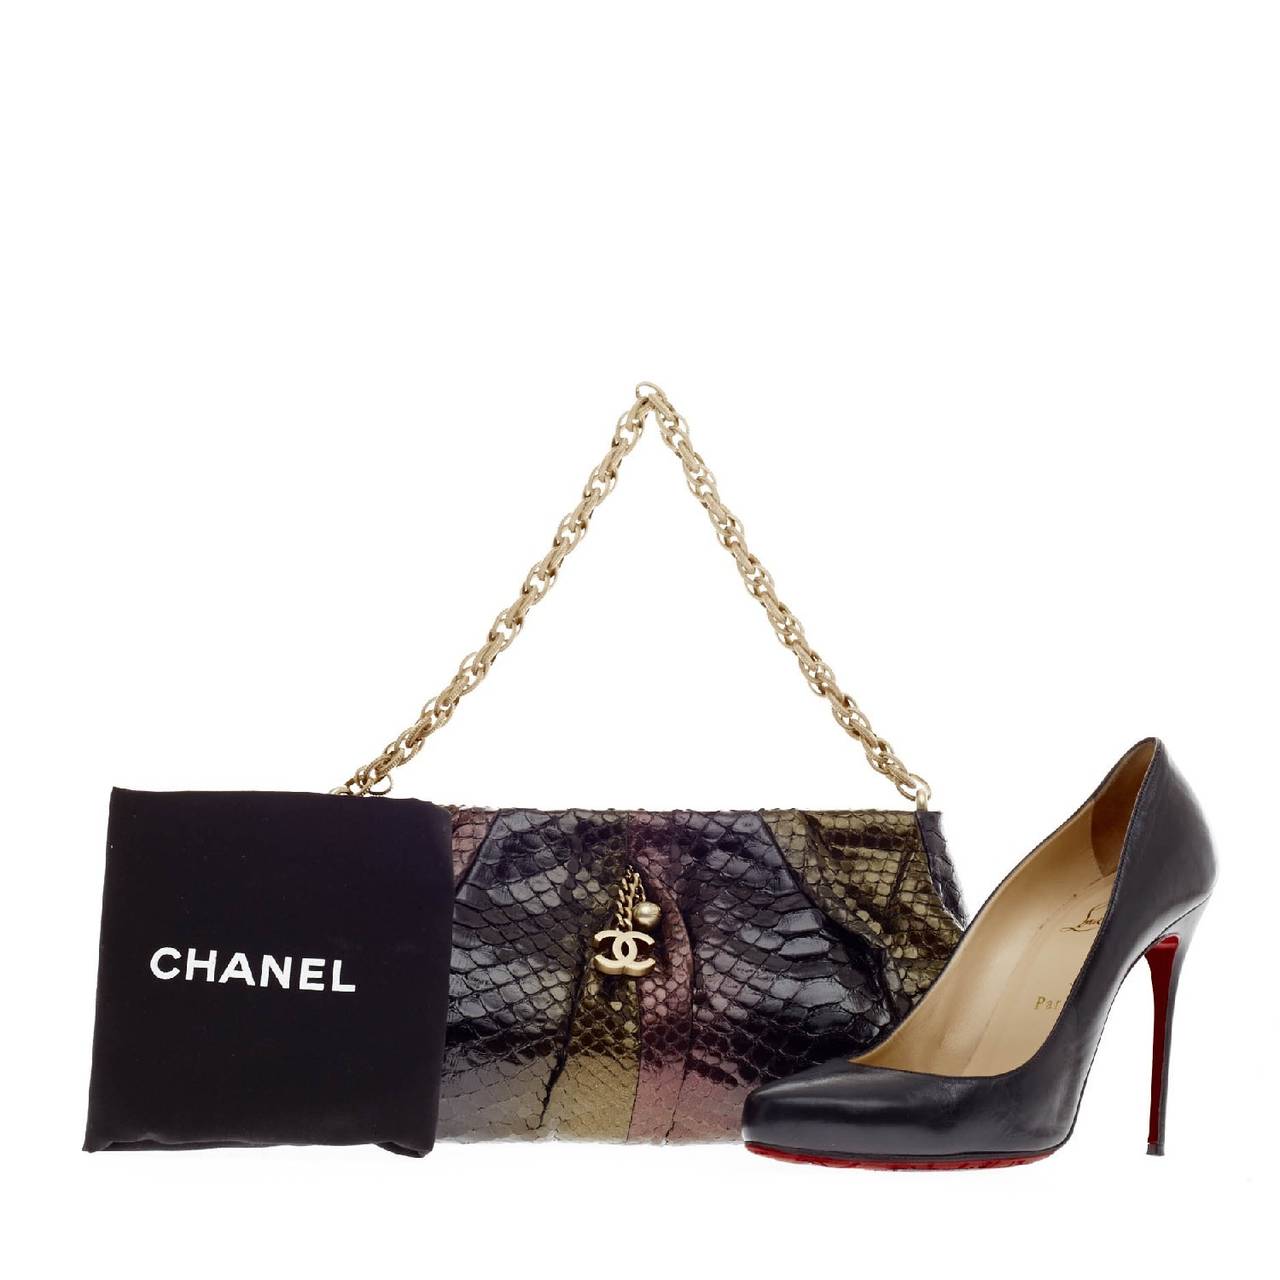 This authentic Chanel Chain Strap Pochette Multicolor Python will certainly add a pop of style to any casual and evening outfit. Constructed in multicolor ombre black, gold and deep purple python skin, this pleated clutch features a matte gold